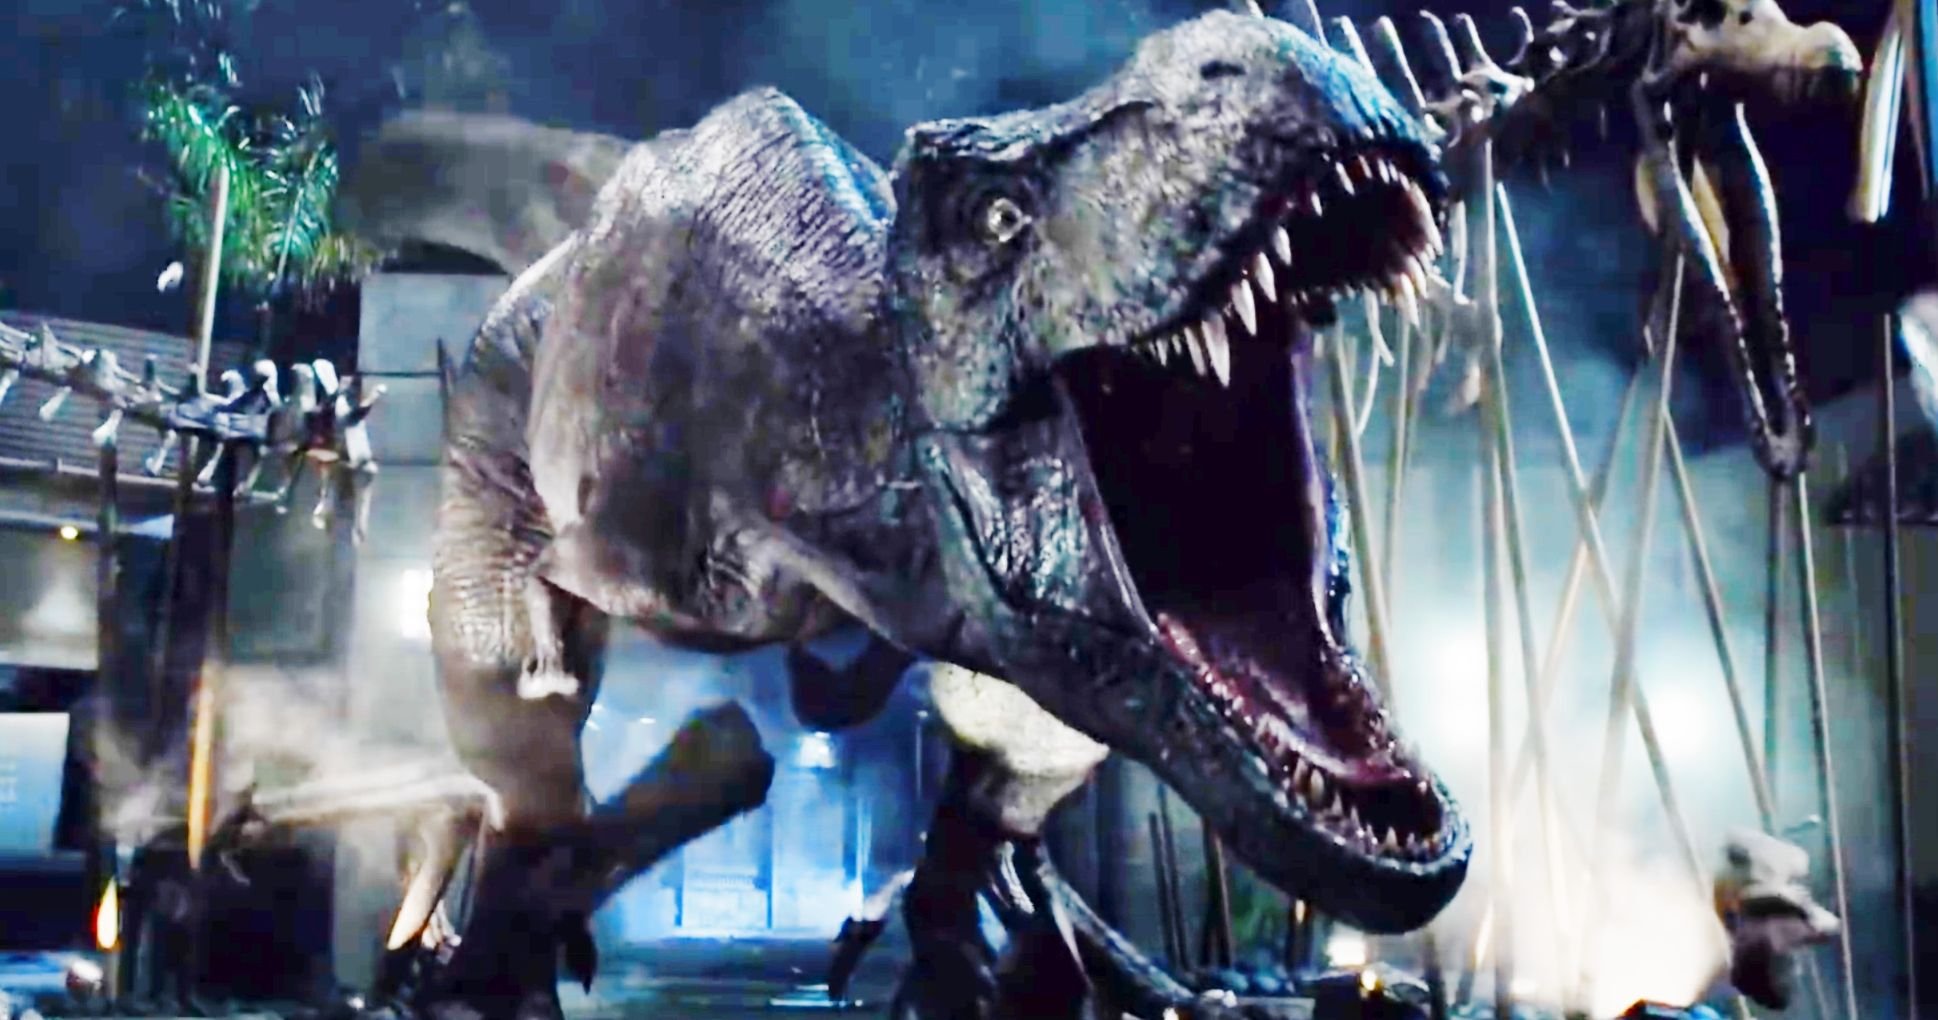 Jurassic World: Dominion Villain Revealed and It Will Rival the T-Rex